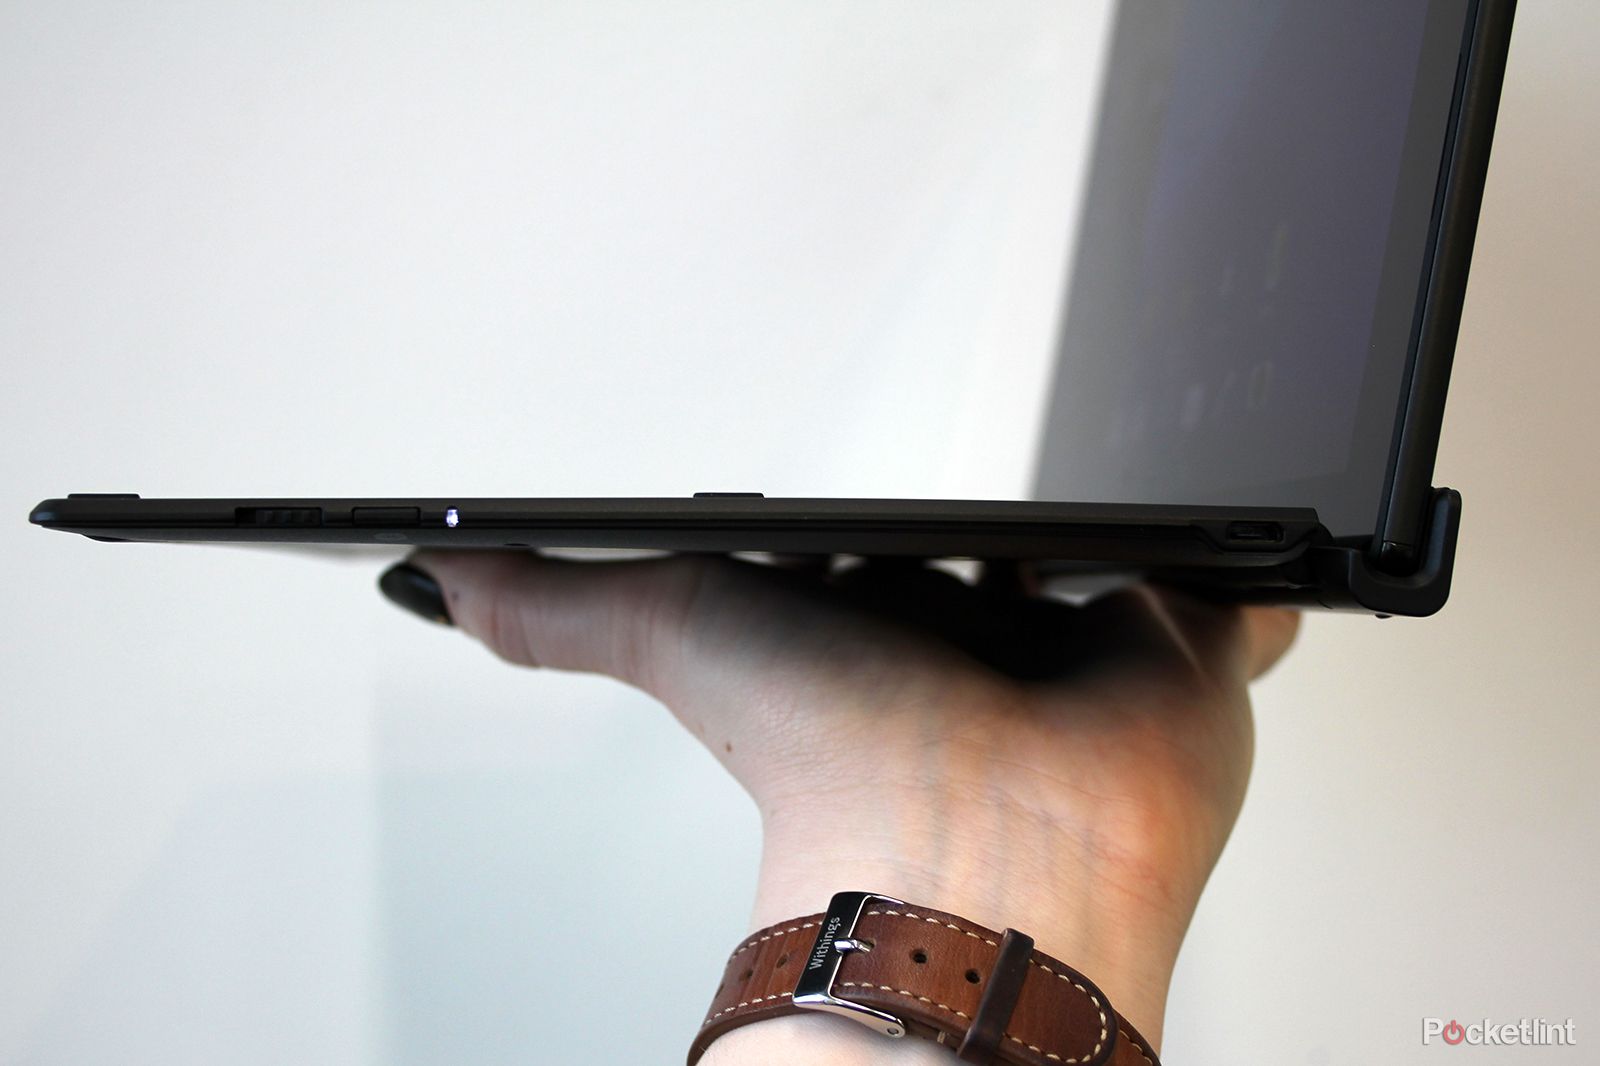 sony xperia z4 tablet accessories hands on slim protection smart speaker and laptop conversion image 30